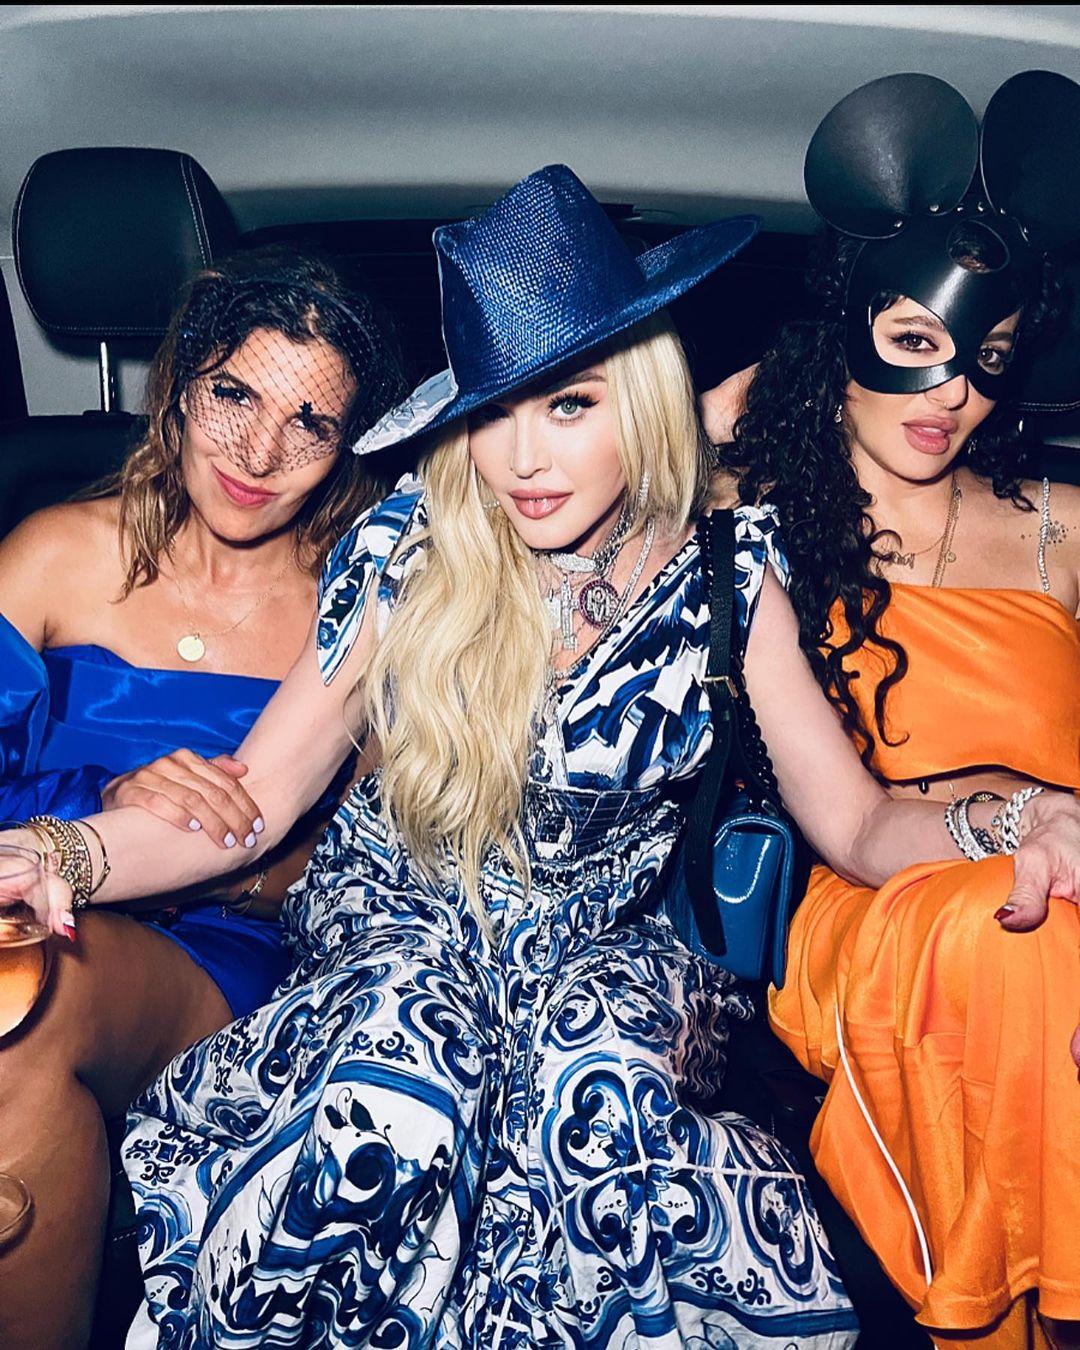 Madonna sitting in between two women